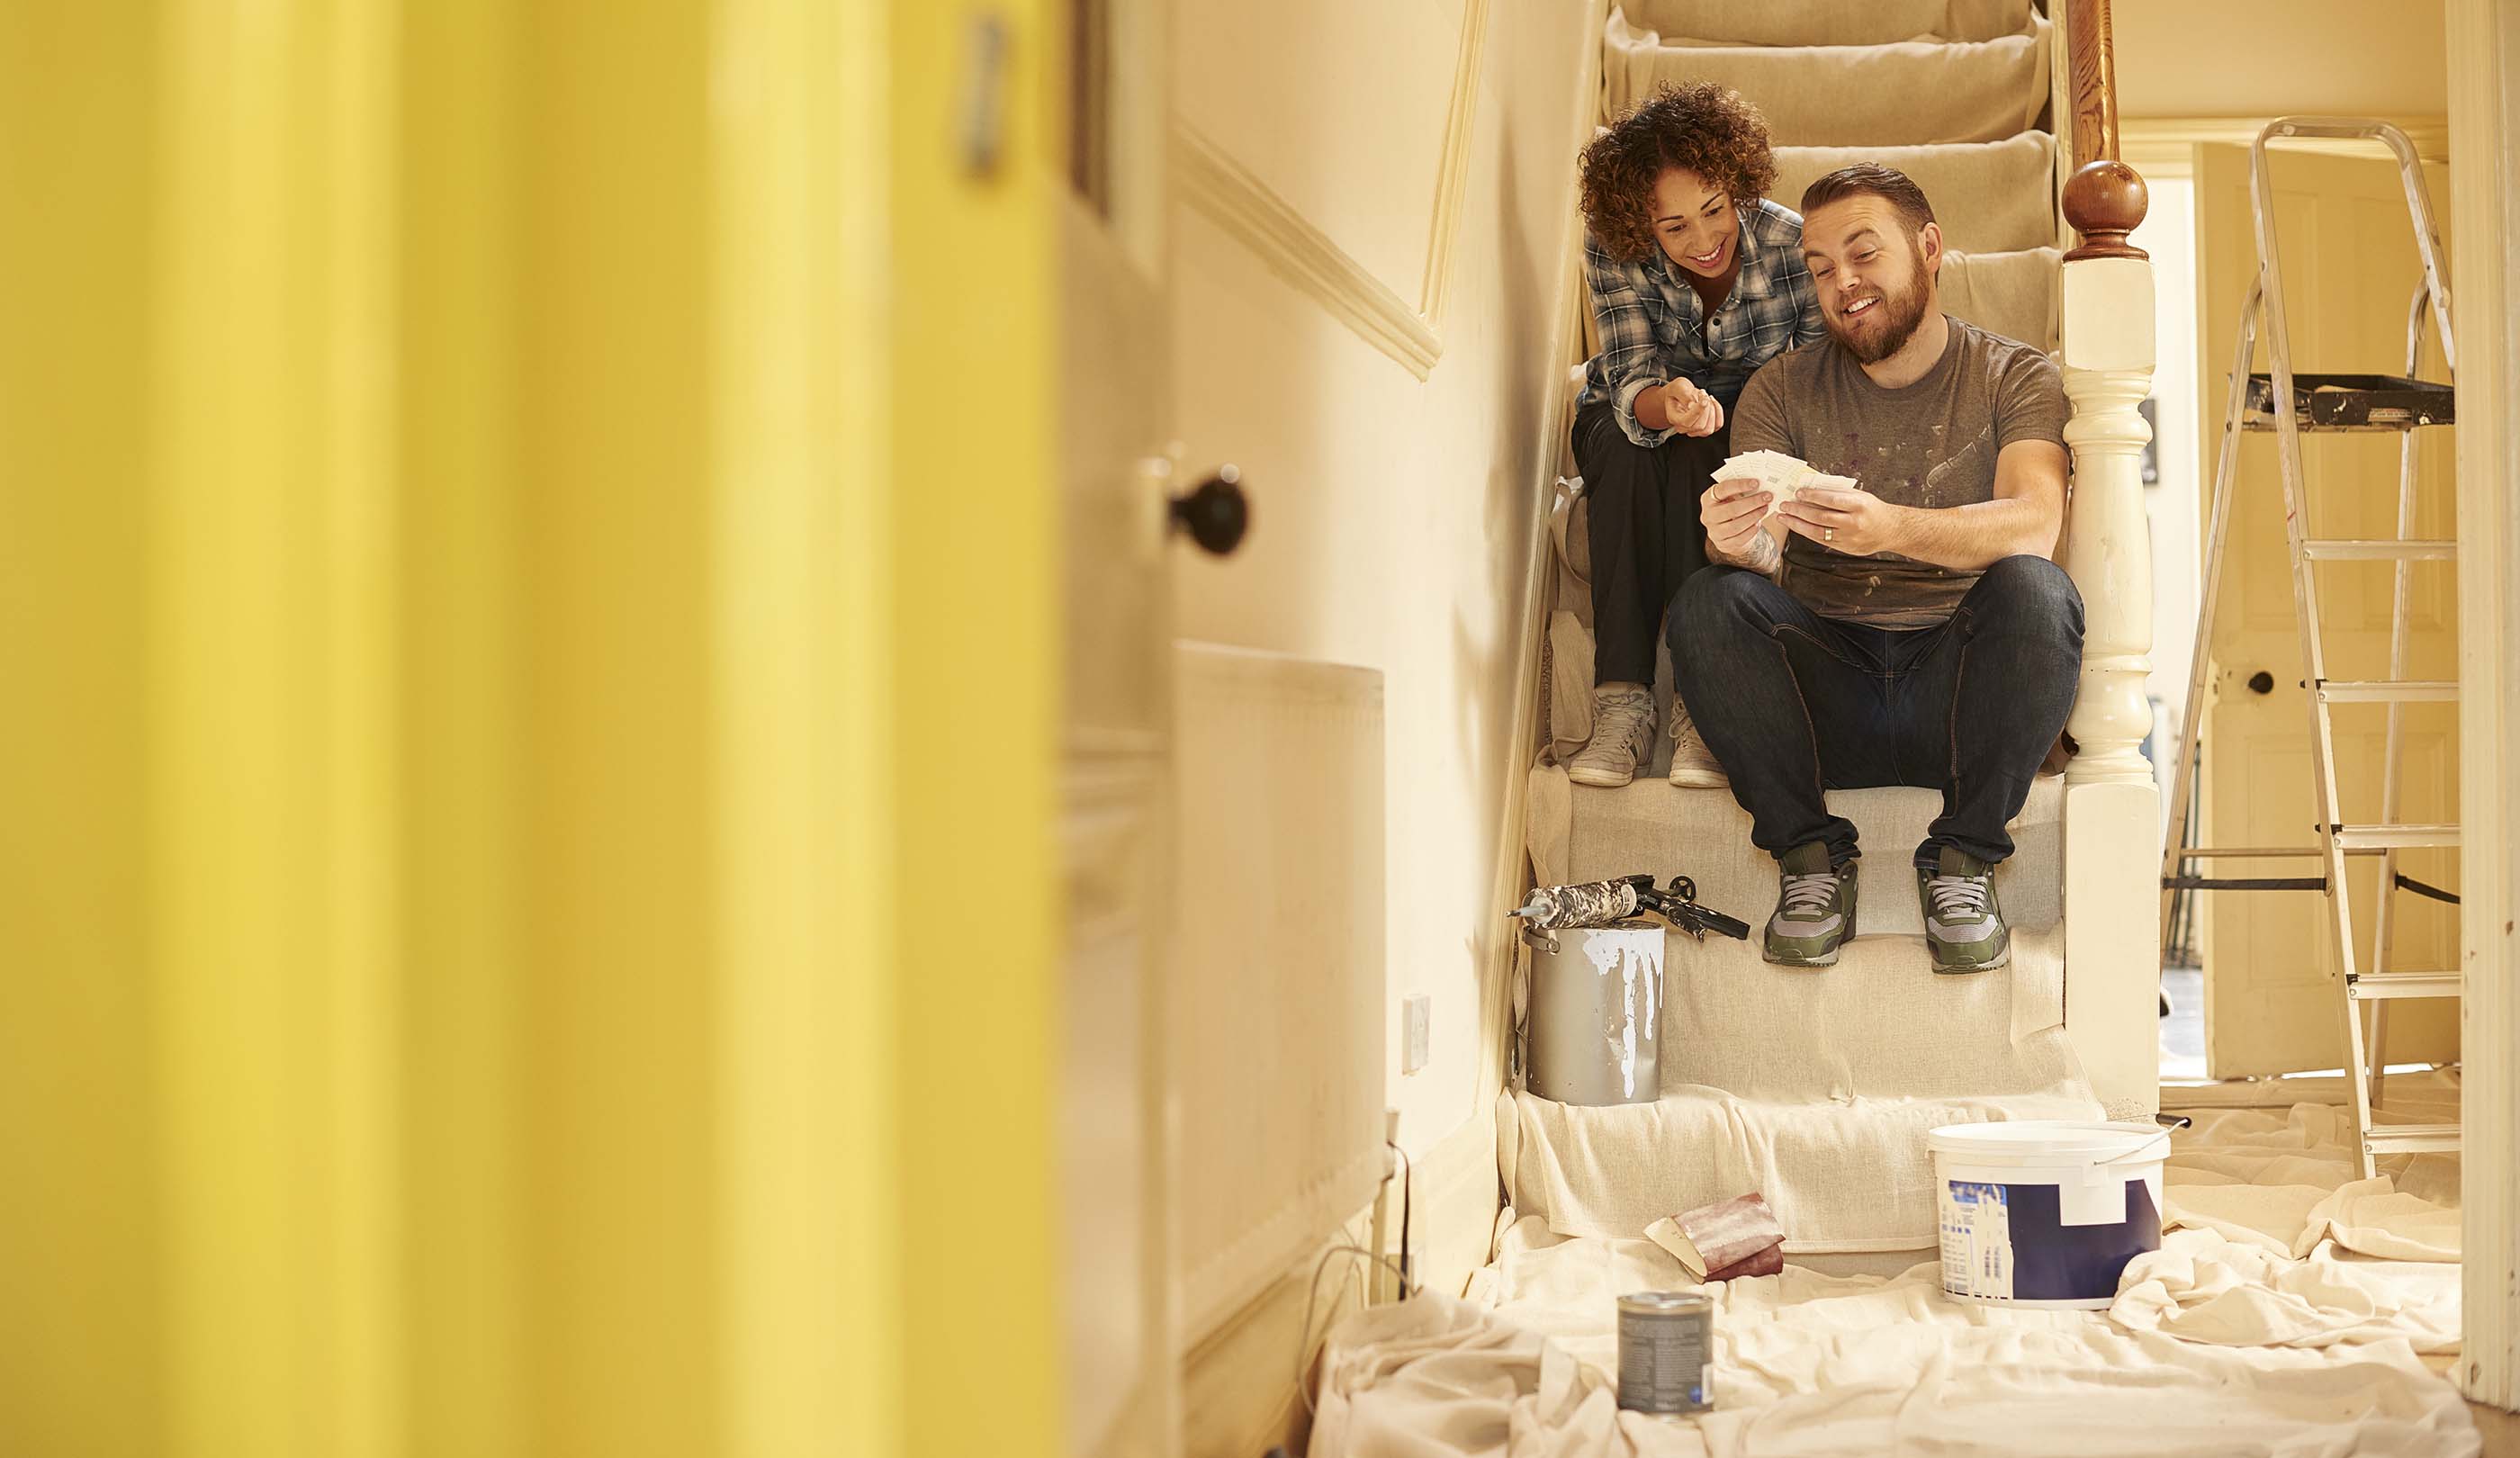 Two people sit on the stairs in a house that is being decorated